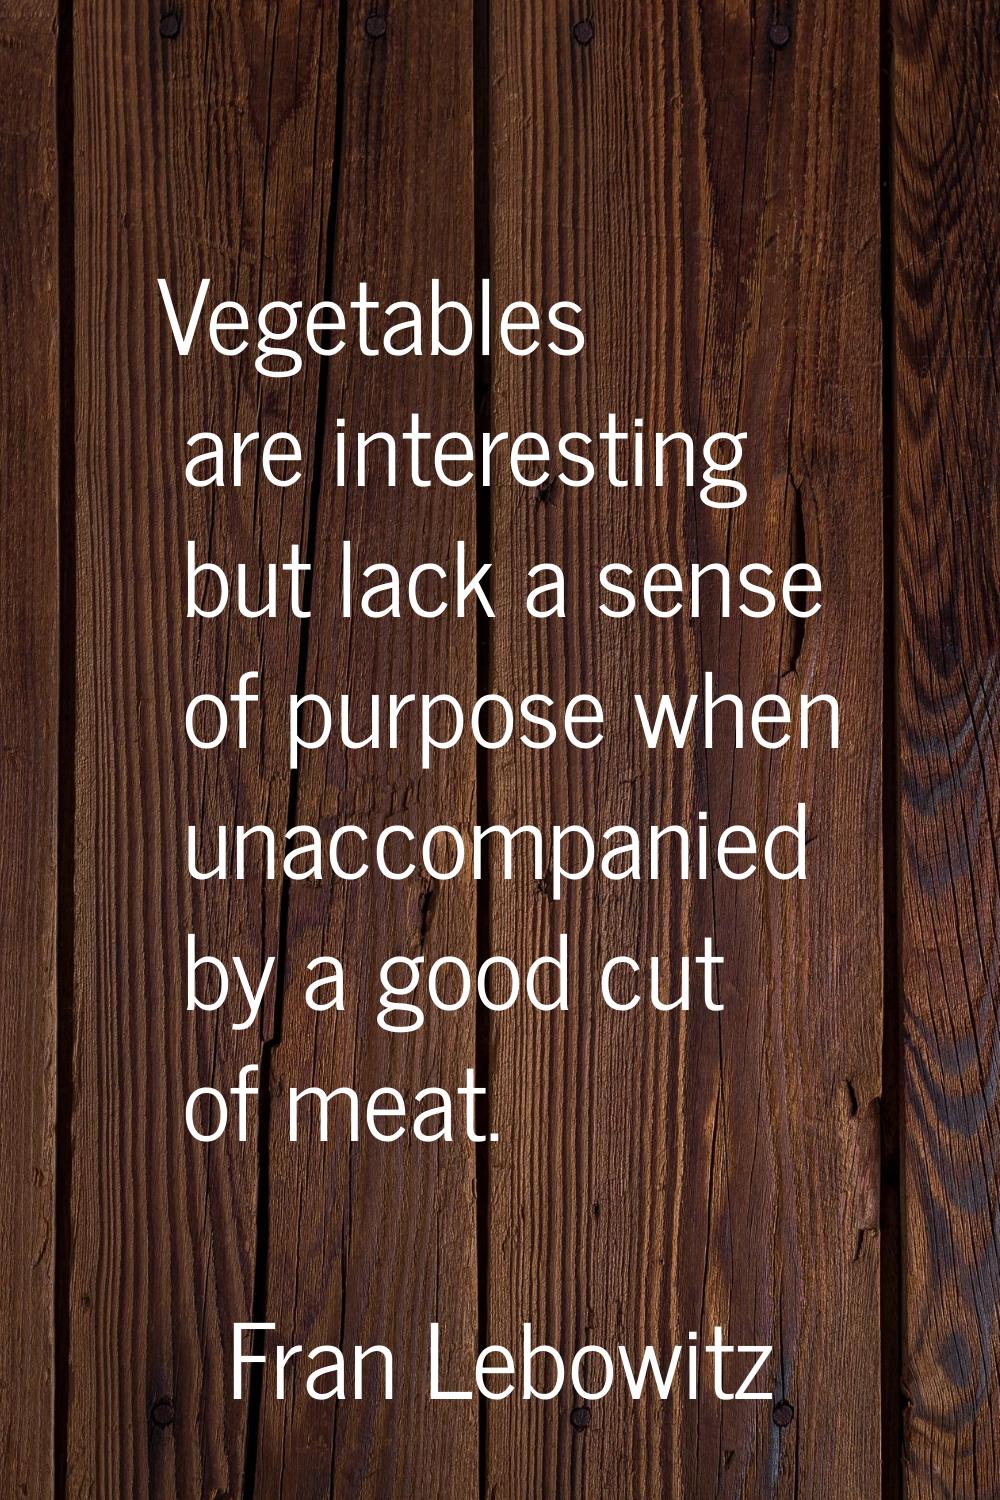 Vegetables are interesting but lack a sense of purpose when unaccompanied by a good cut of meat.